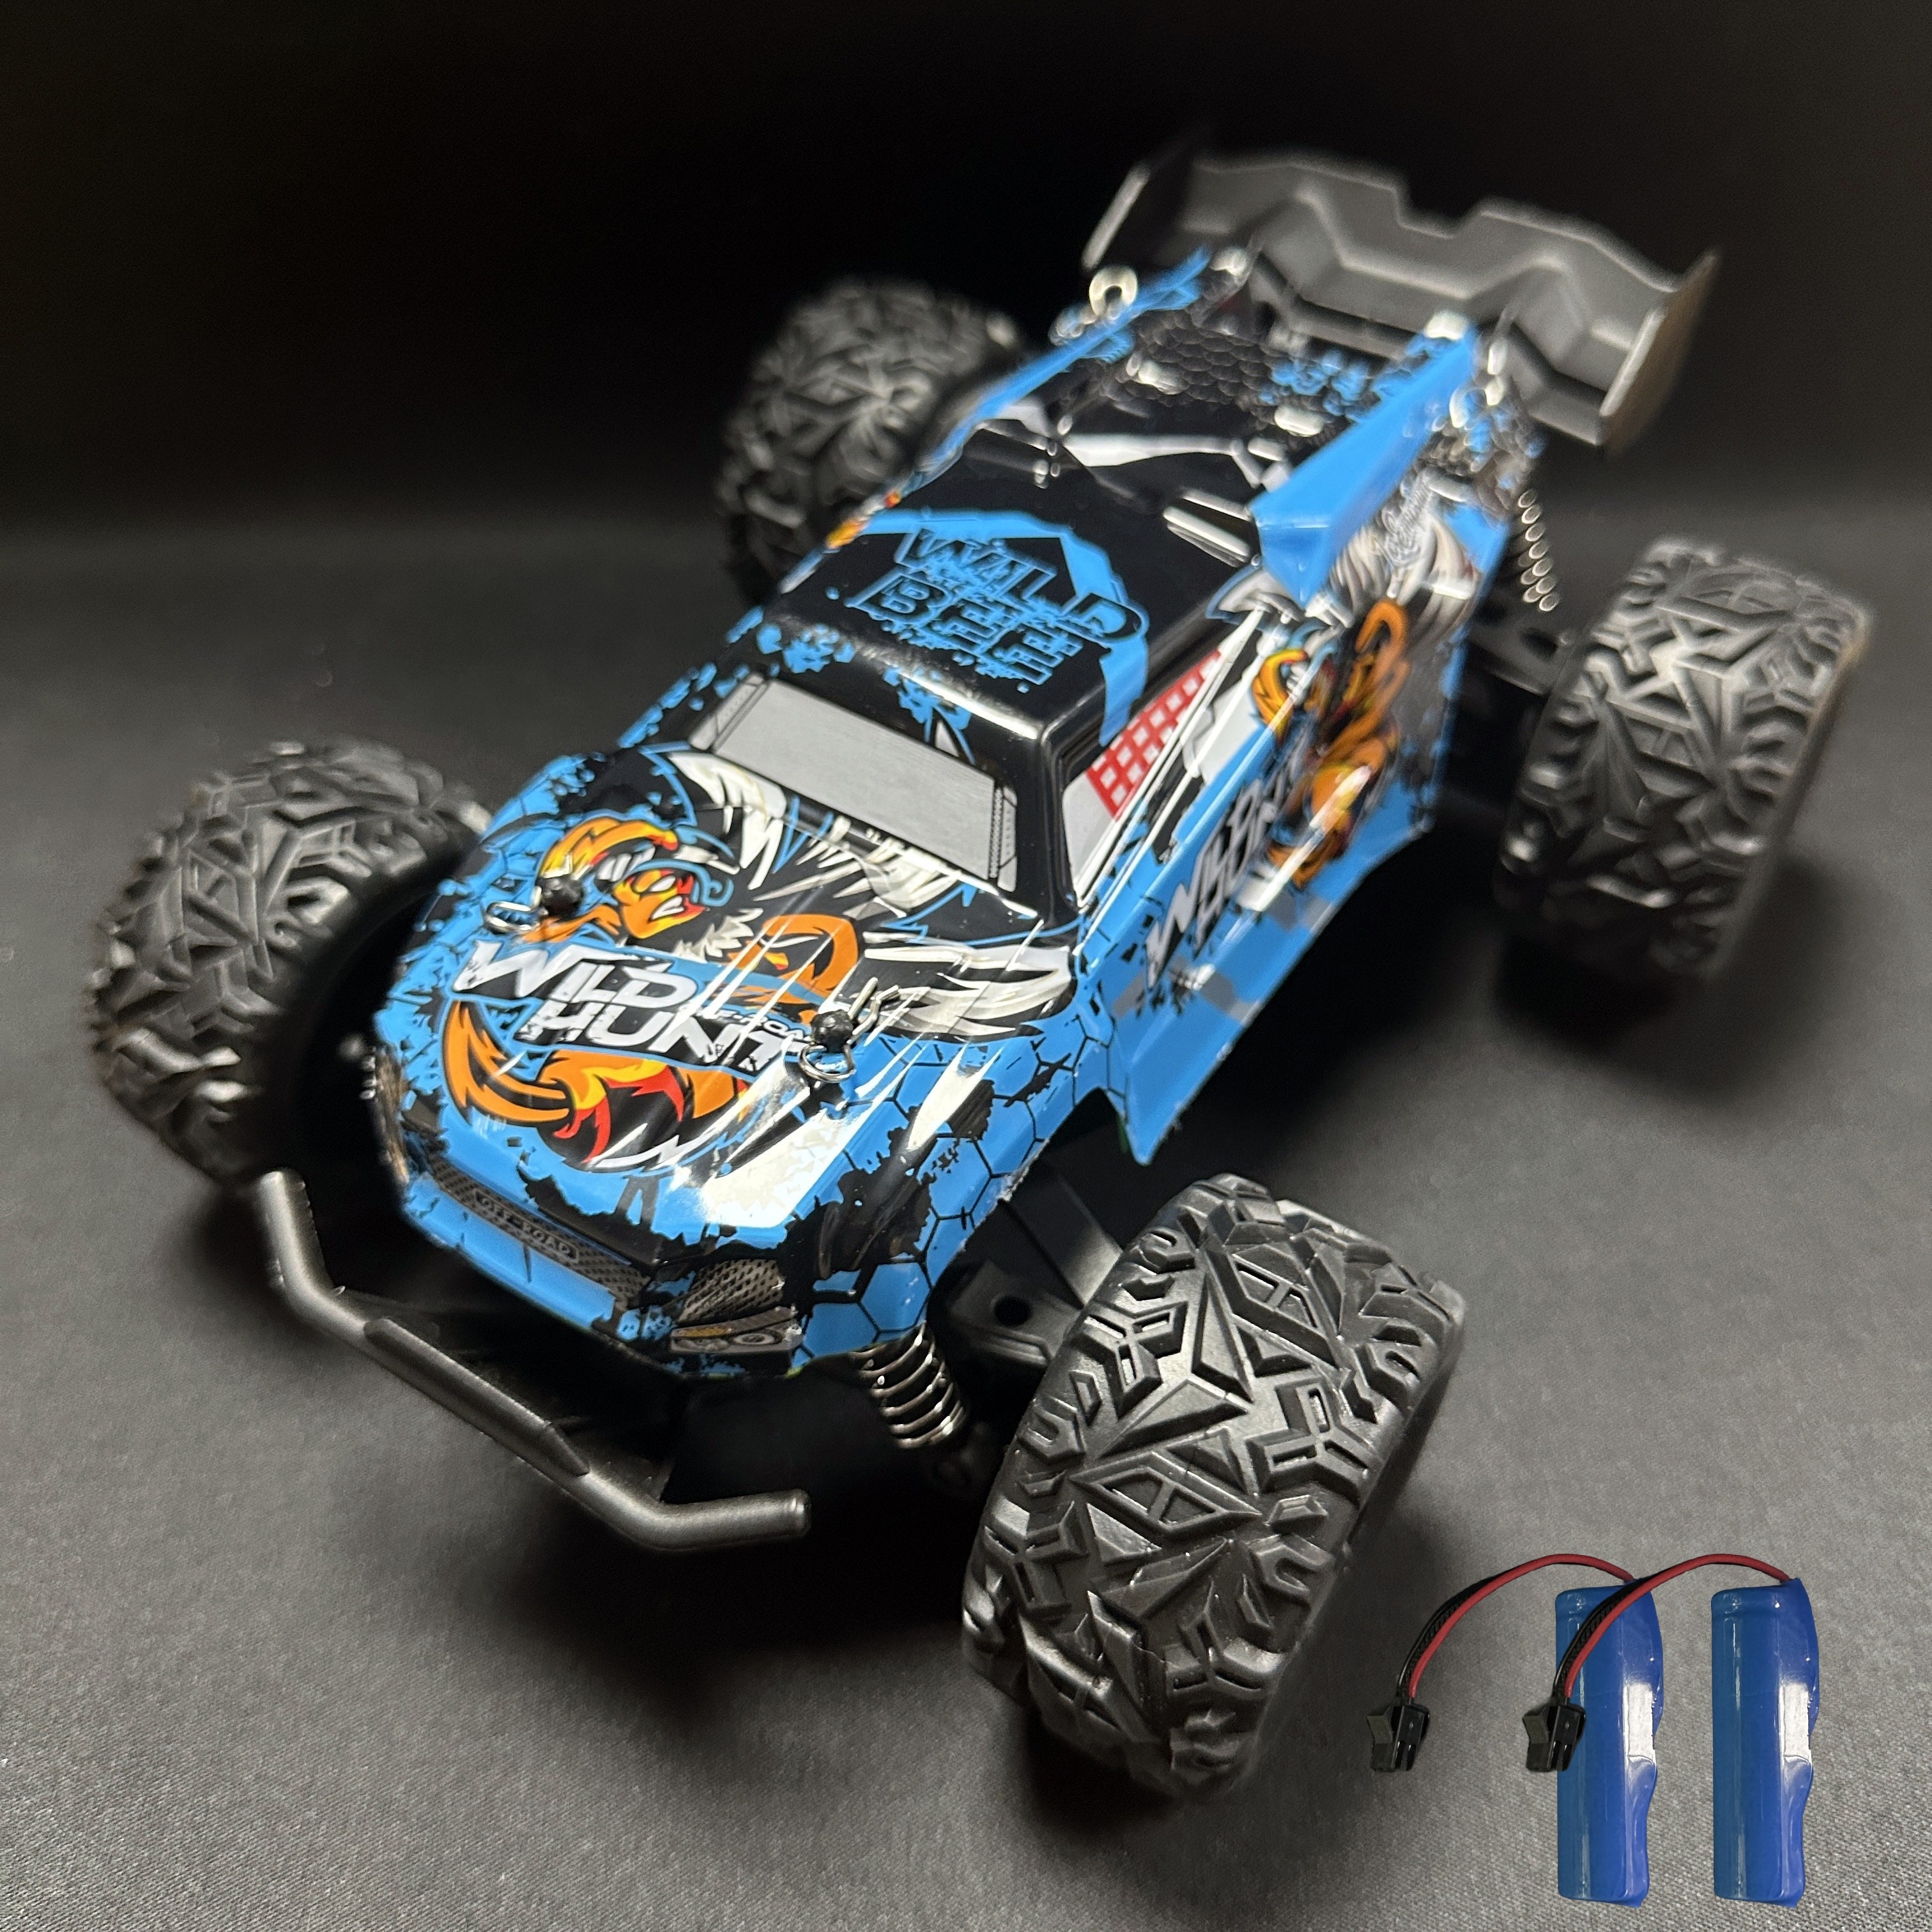 RC Remote Control Big Wheel Monster Truck Off Road Kids Toy Car Gift With  Lights